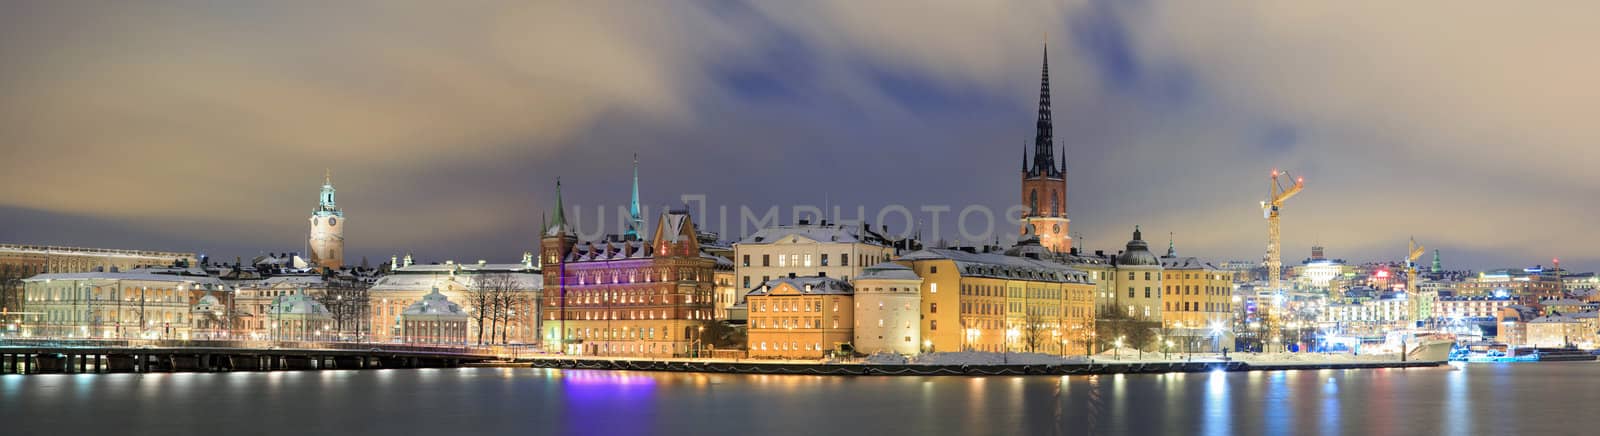 Panorama Cityscape of Gamla Stan Stockholm Sweden by vichie81